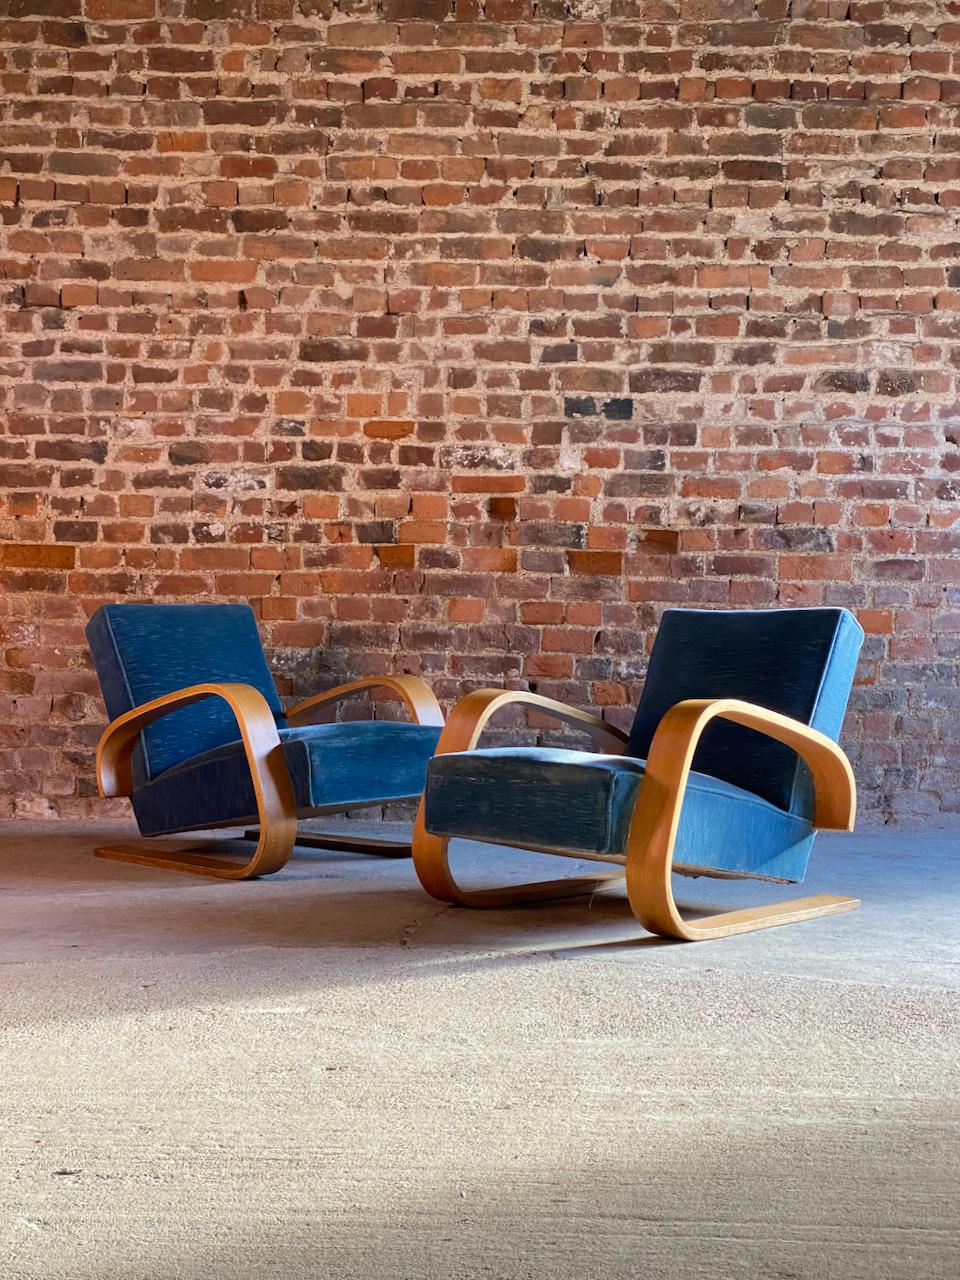 Pair of Early Alvar Aalto Tank Chairs Model 400 by Artek Finland Circa 1940?

Magnificent and rare pair of early twentieth century 'Tank' Model 400 armchairs, designed by Alvar Aalto and Manufactured by O.y. Huonekalu-ja Rakennustyötehdas A.b.,